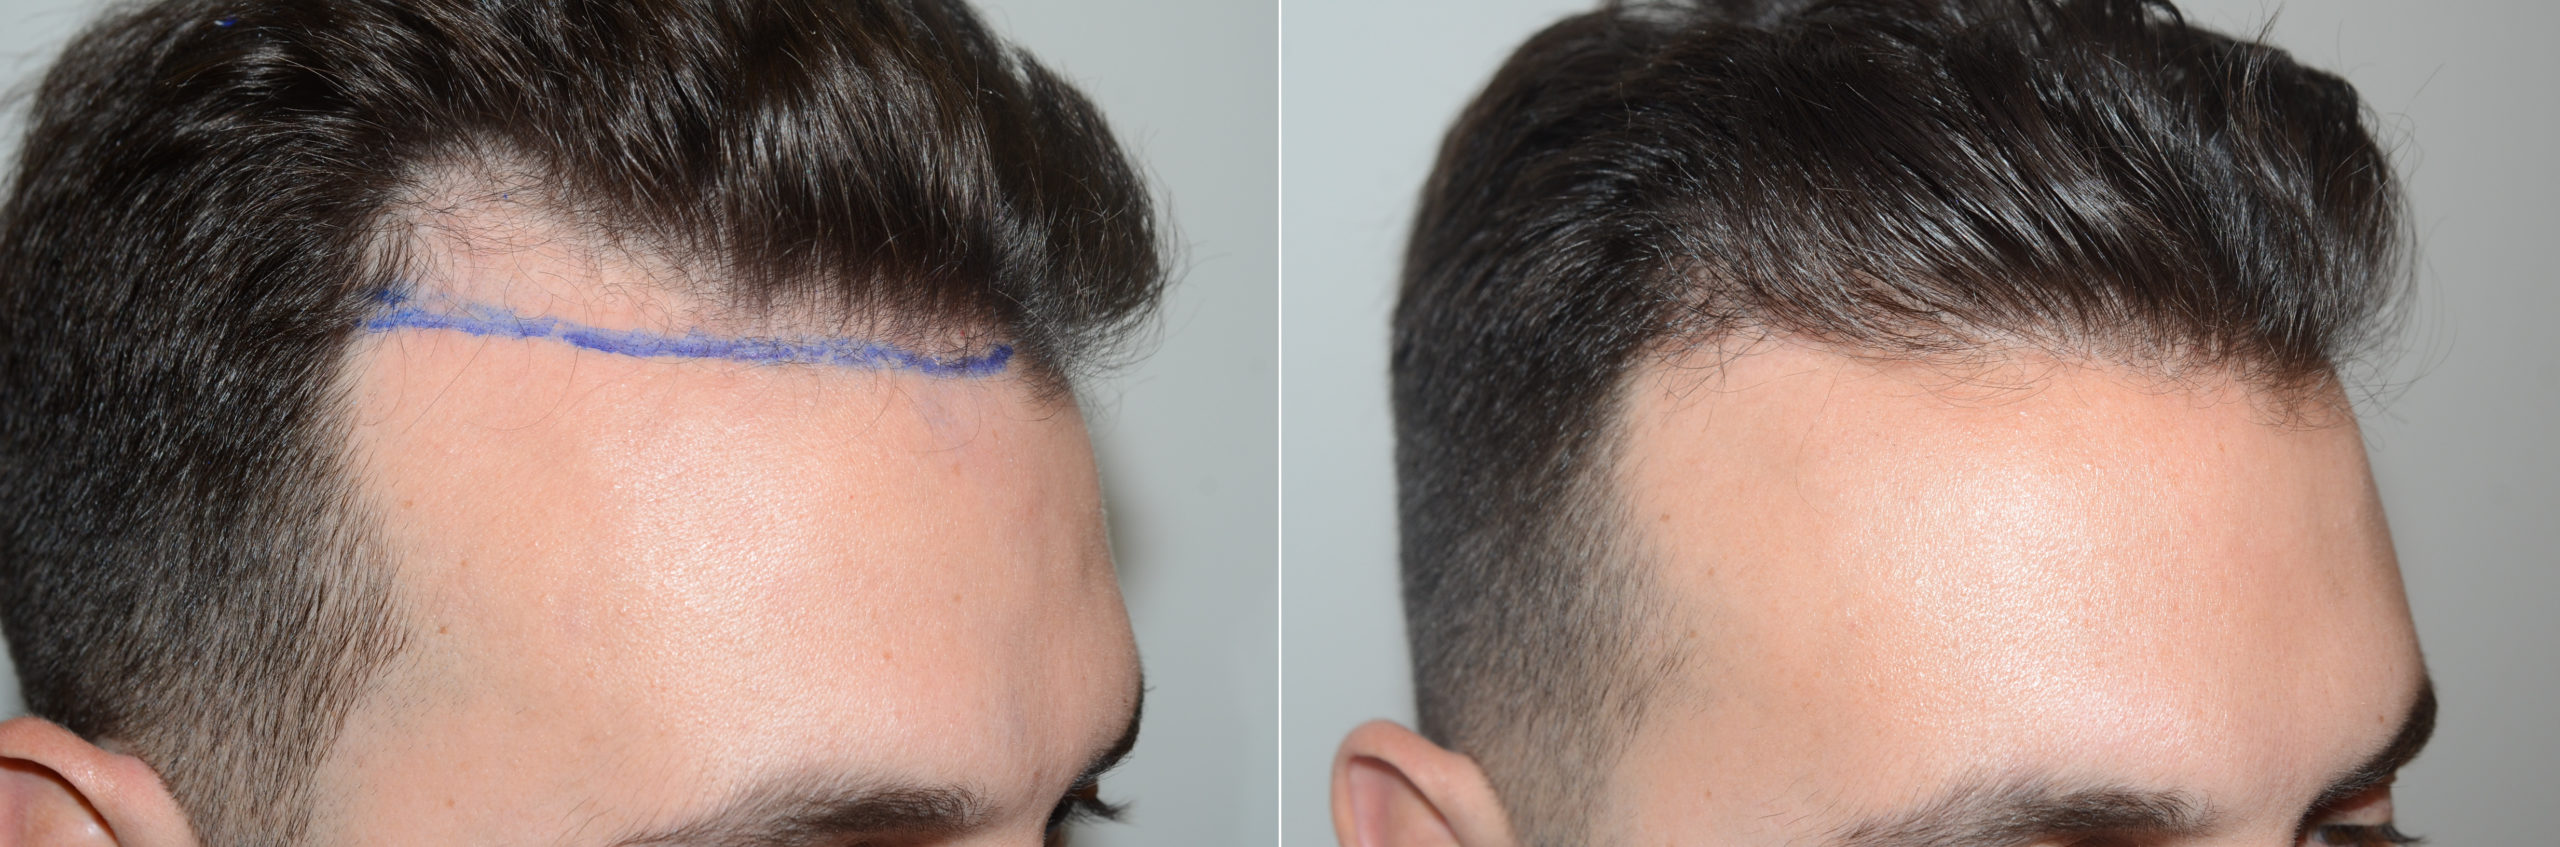 Forehead Reduction Surgery, Hair Transplants for Men photos | Miami, FL |  Patient123194